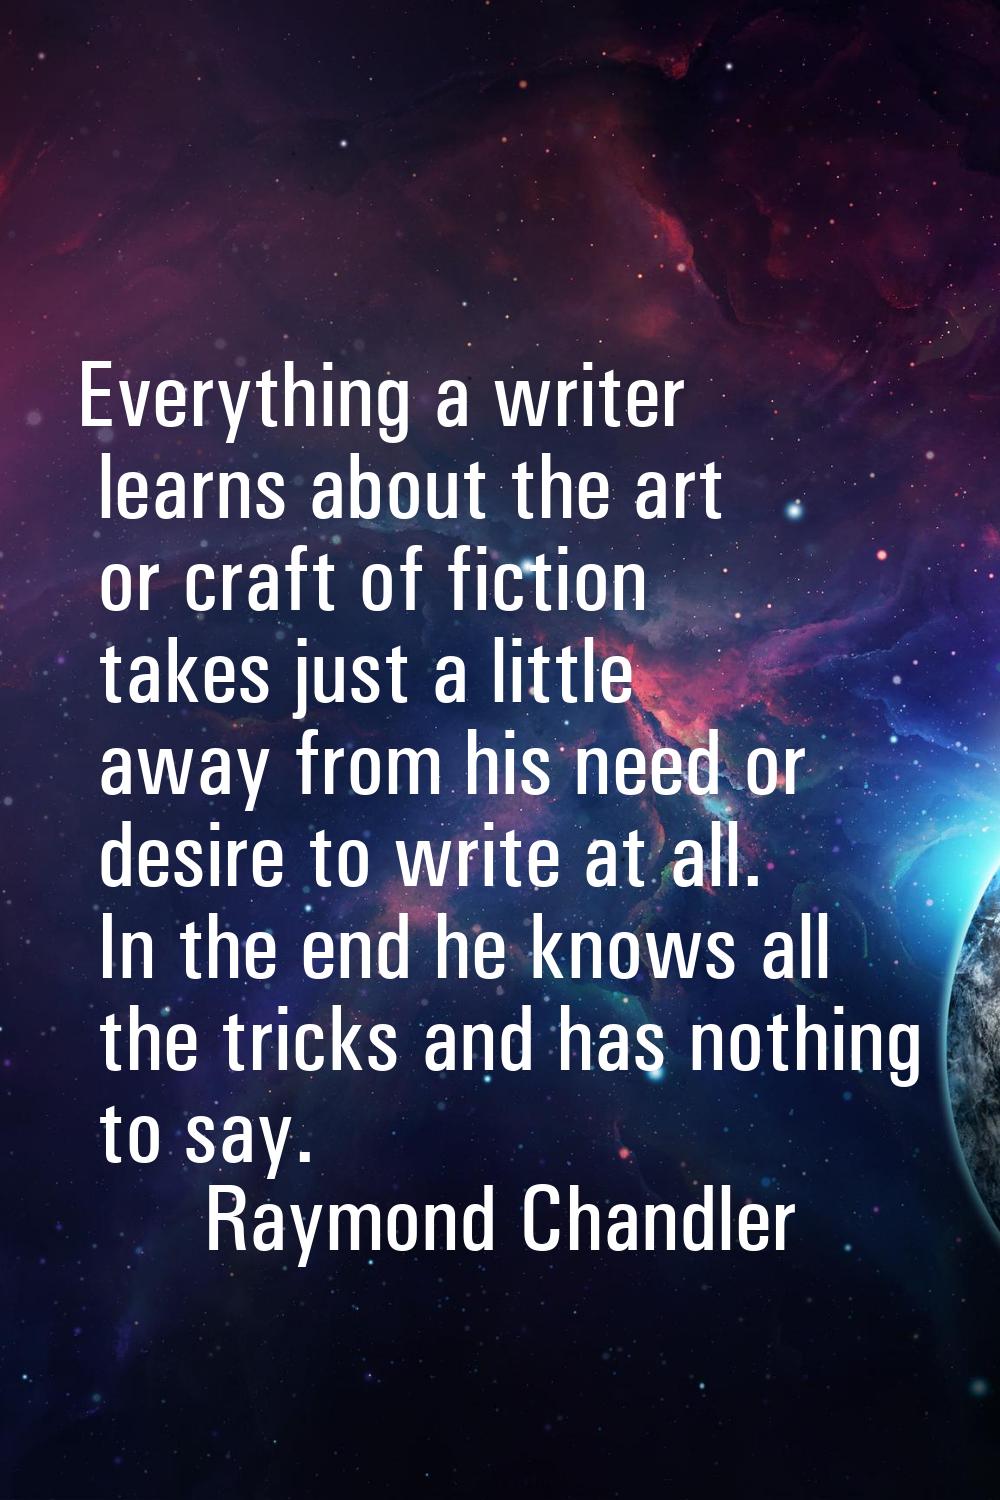 Everything a writer learns about the art or craft of fiction takes just a little away from his need